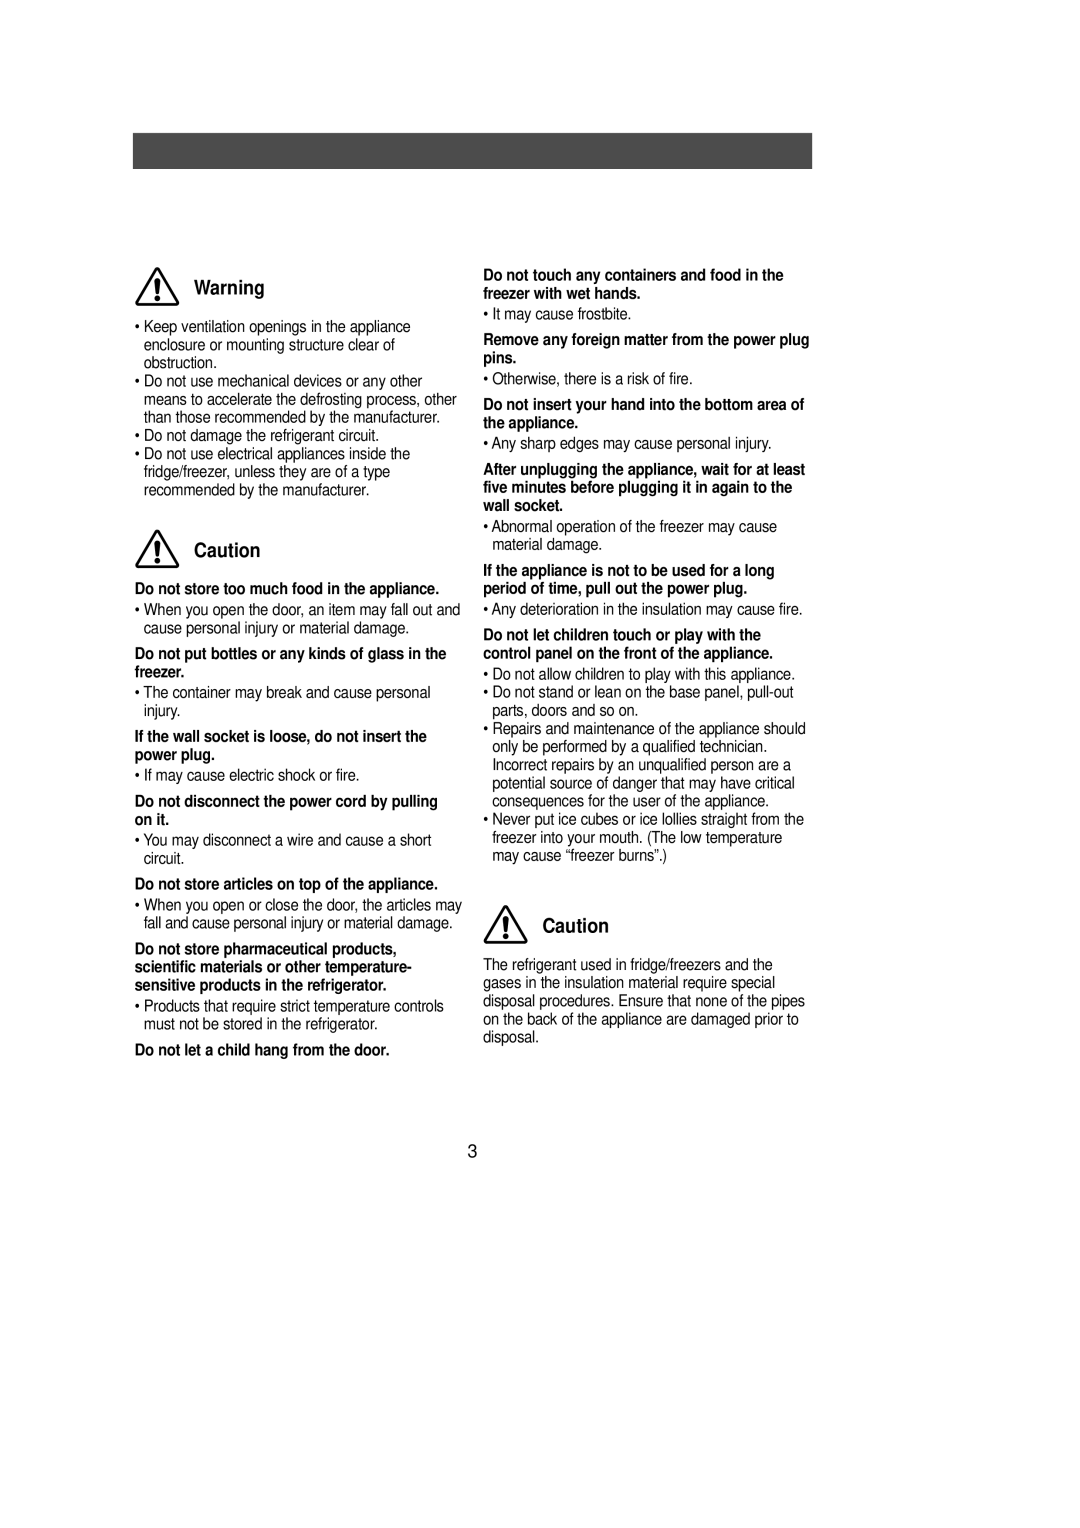 Samsung DA68-01281A manual Do not store too much food in the appliance, Do not disconnect the power cord by pulling on it 